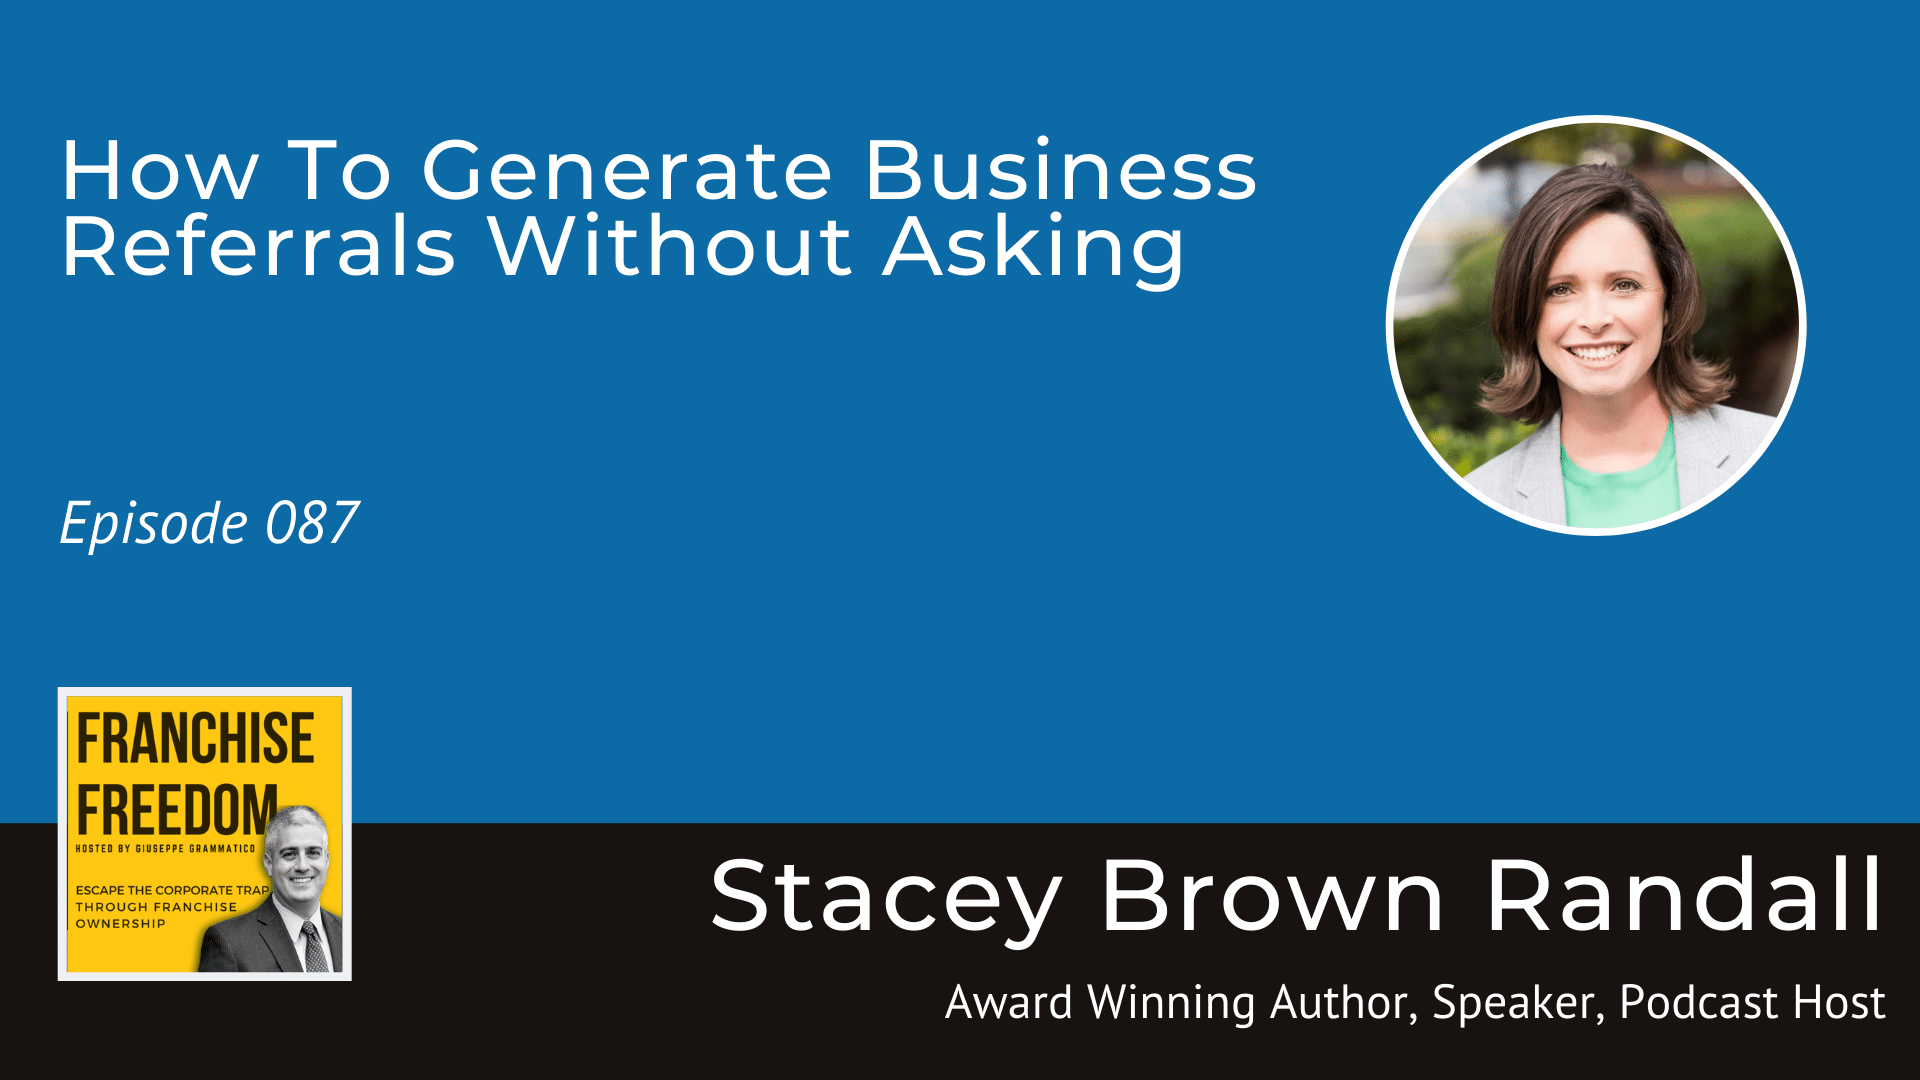 How To Generate Business Referrals Without Asking | Stacey Brown Randall